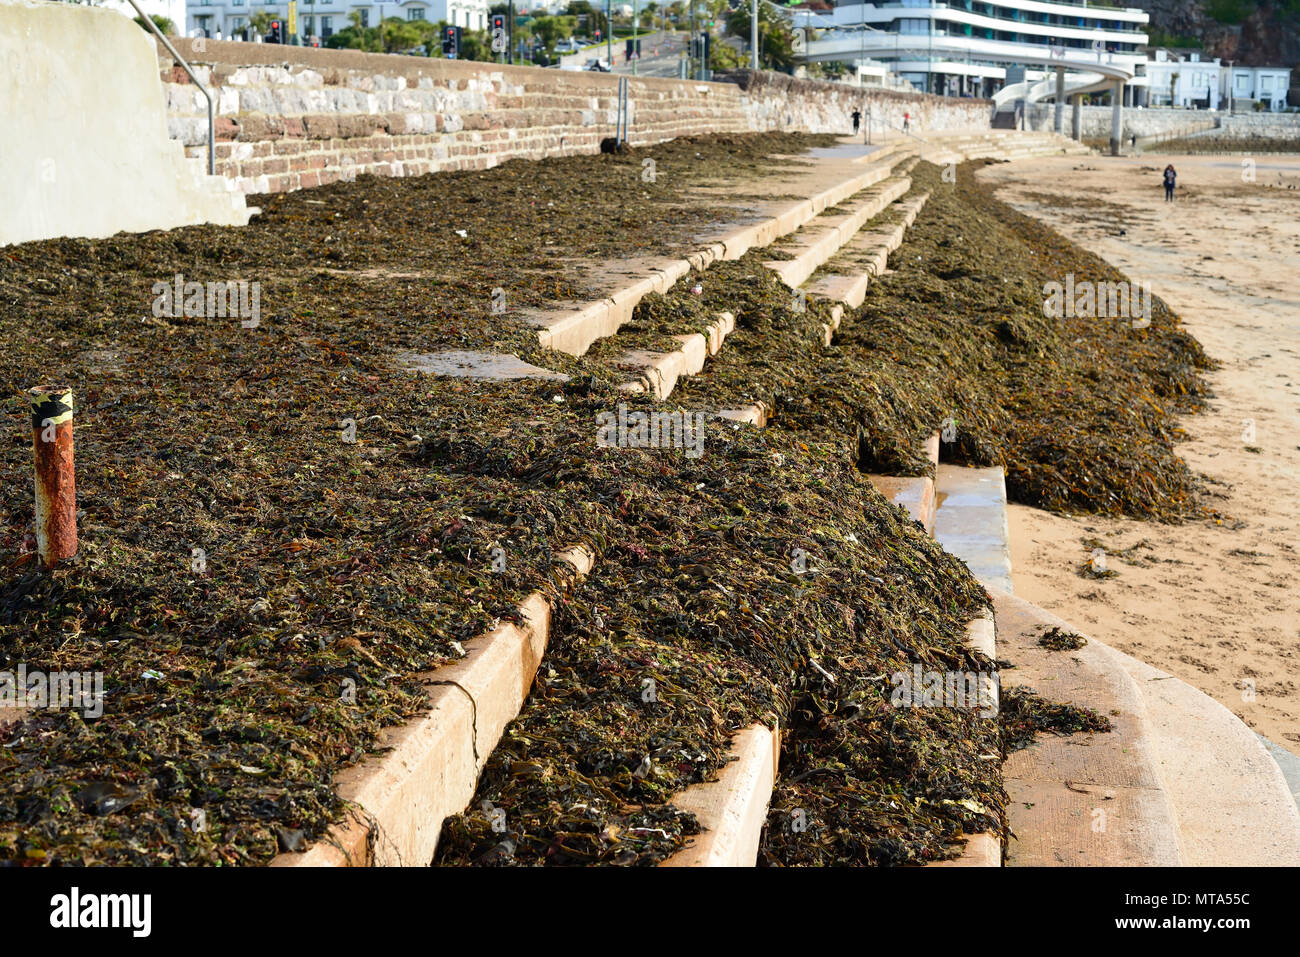 Seaweed washed up on the promenade along Torquay seafront. Stock Photo